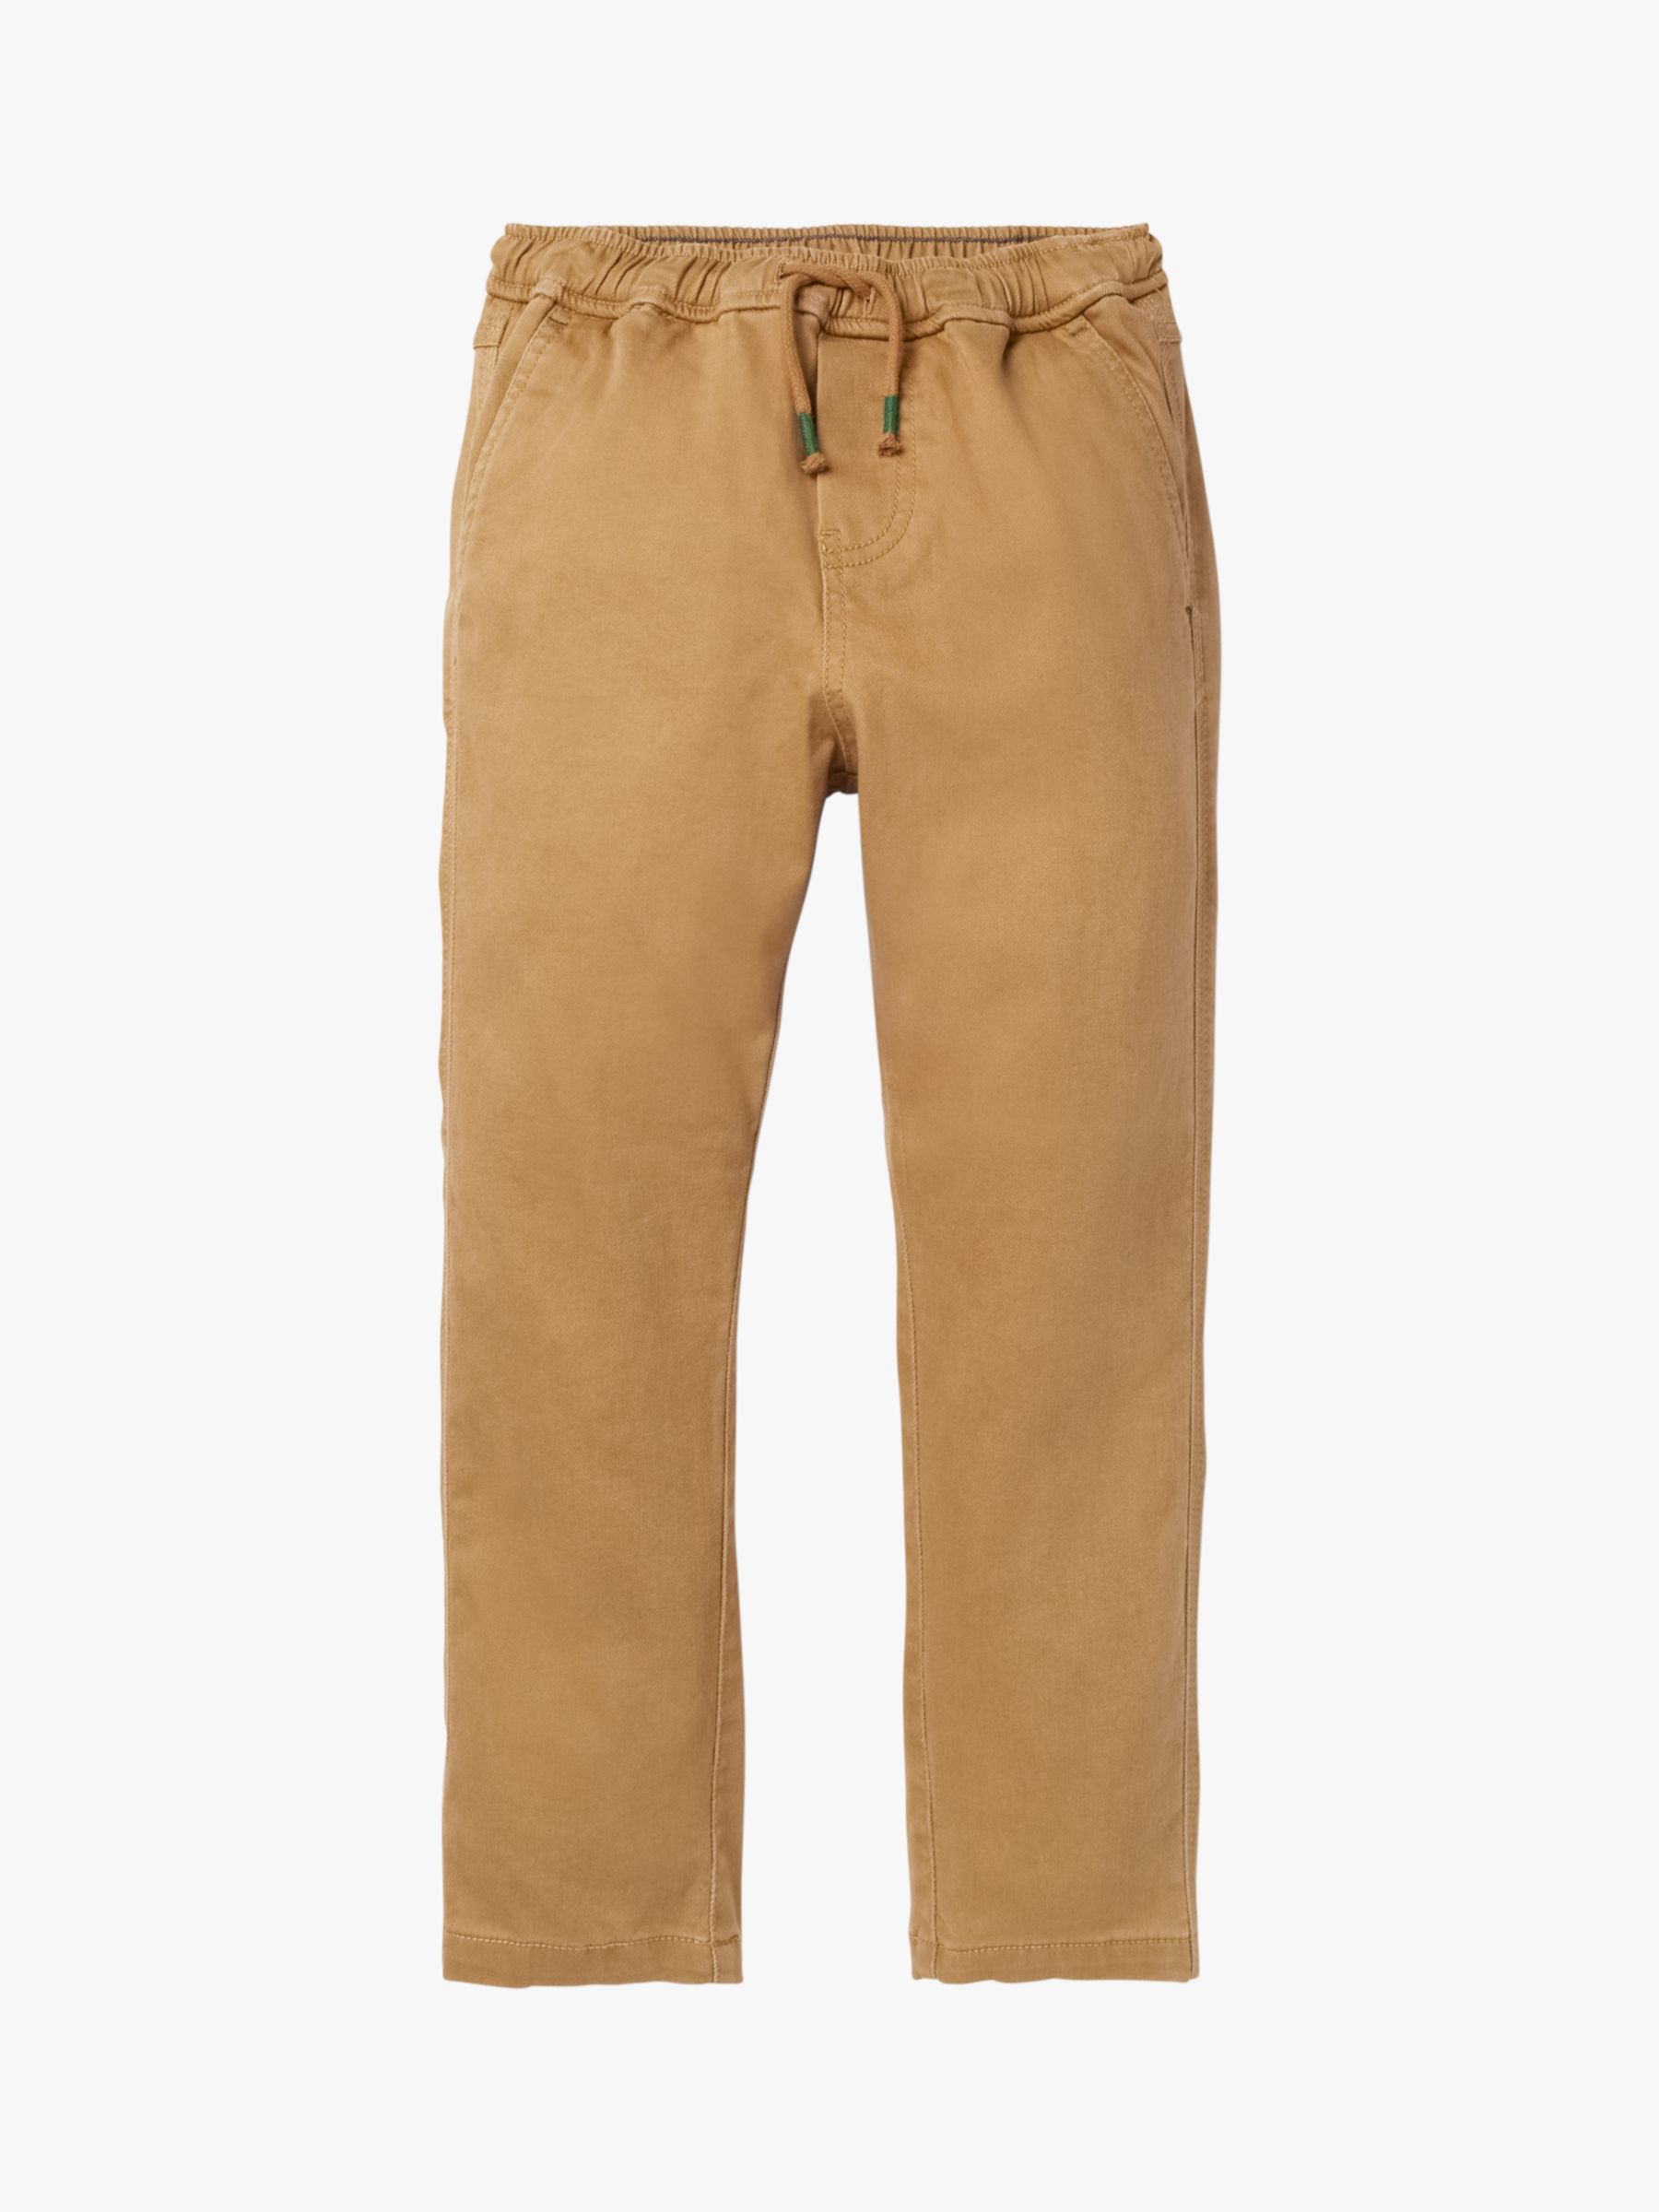 Image of Mini Boden Boys Relaxed Slim PullOn Trousers Butterscotch Brown